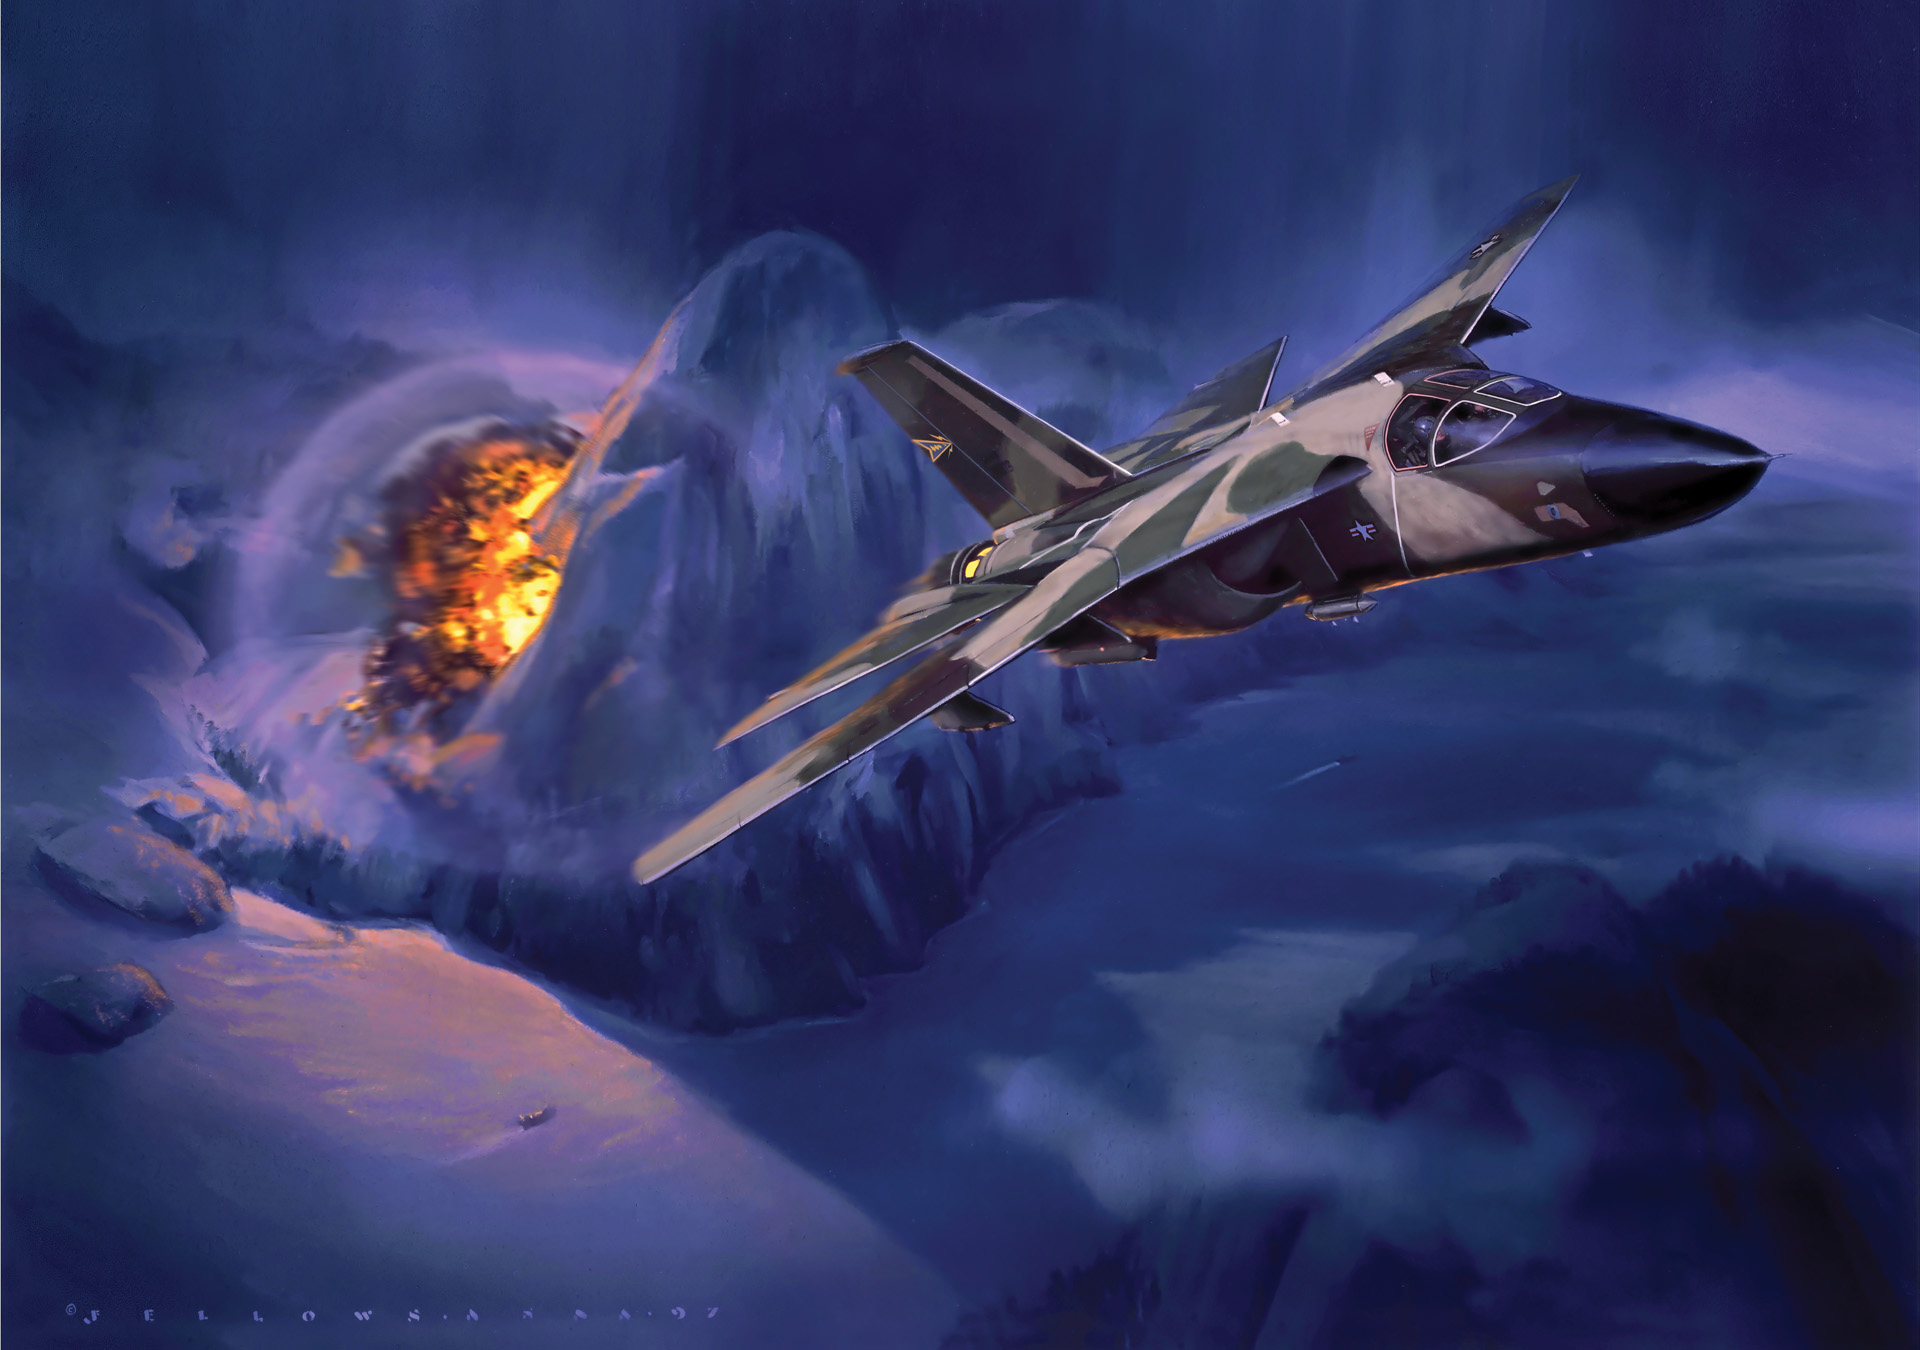 A supersonic Air Force F-111 Aardvark destroys a North Vietnamese ordnance bunker in March in 1968 in a painting by Jack Fellows.